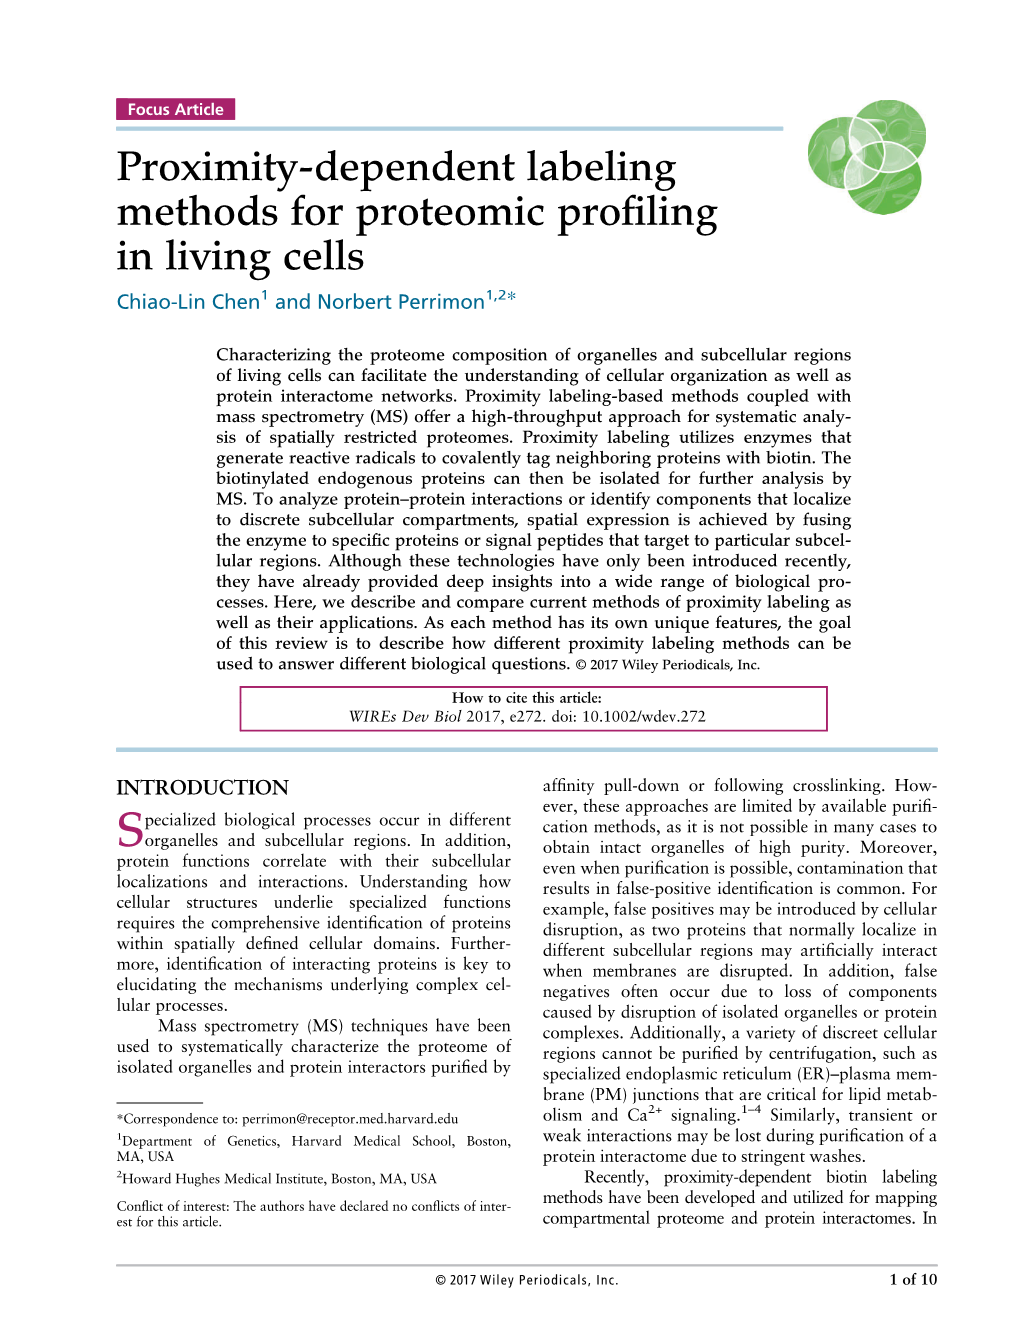 Proximity-Dependent Labeling Methods for Proteomic Profiling In